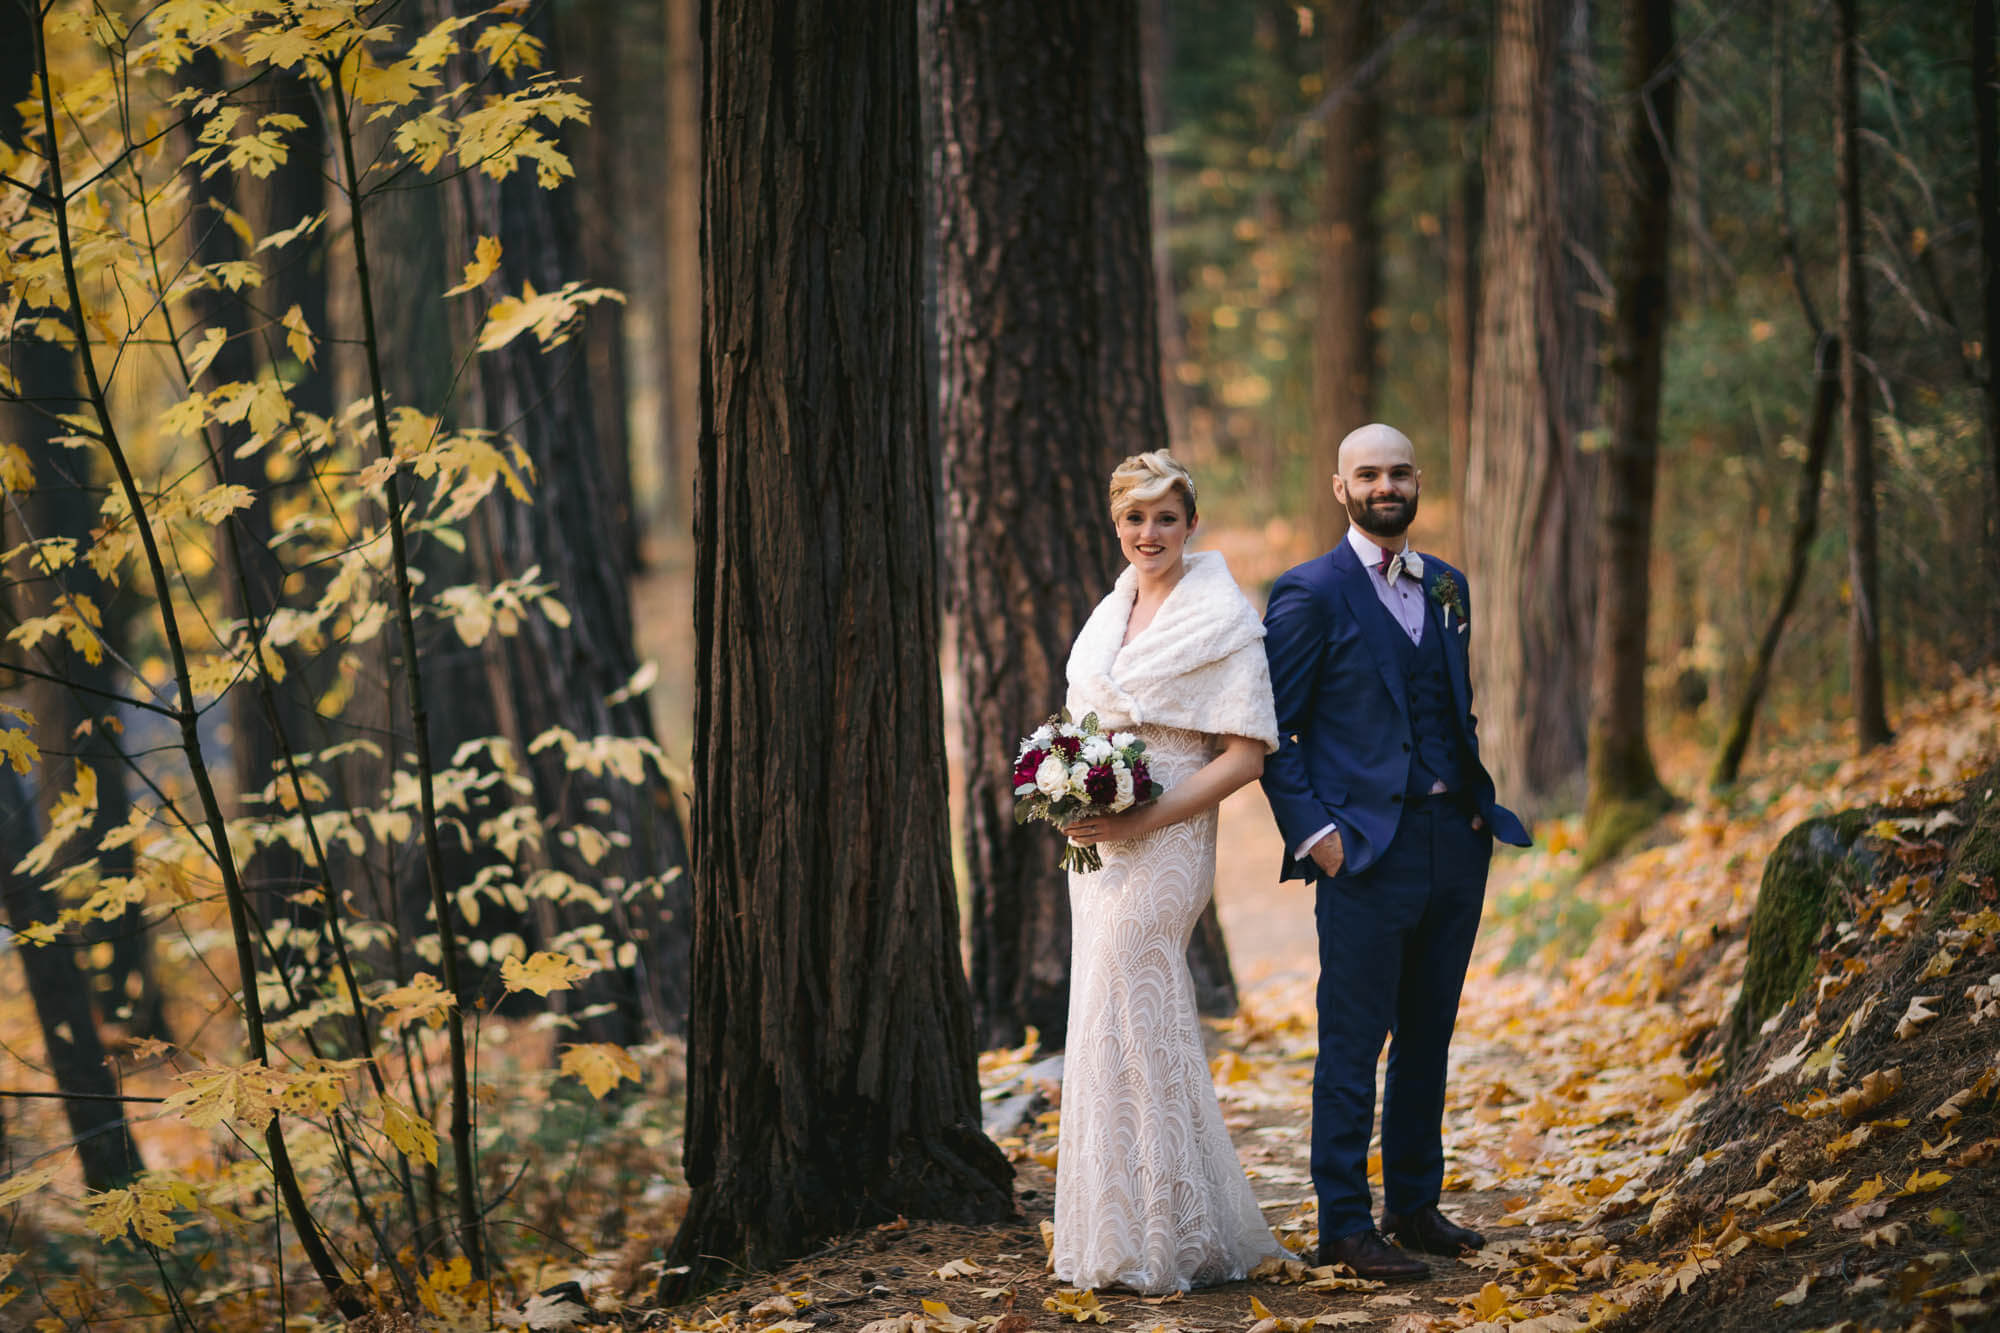 Bride and groom in the forest in Yosemite National Park